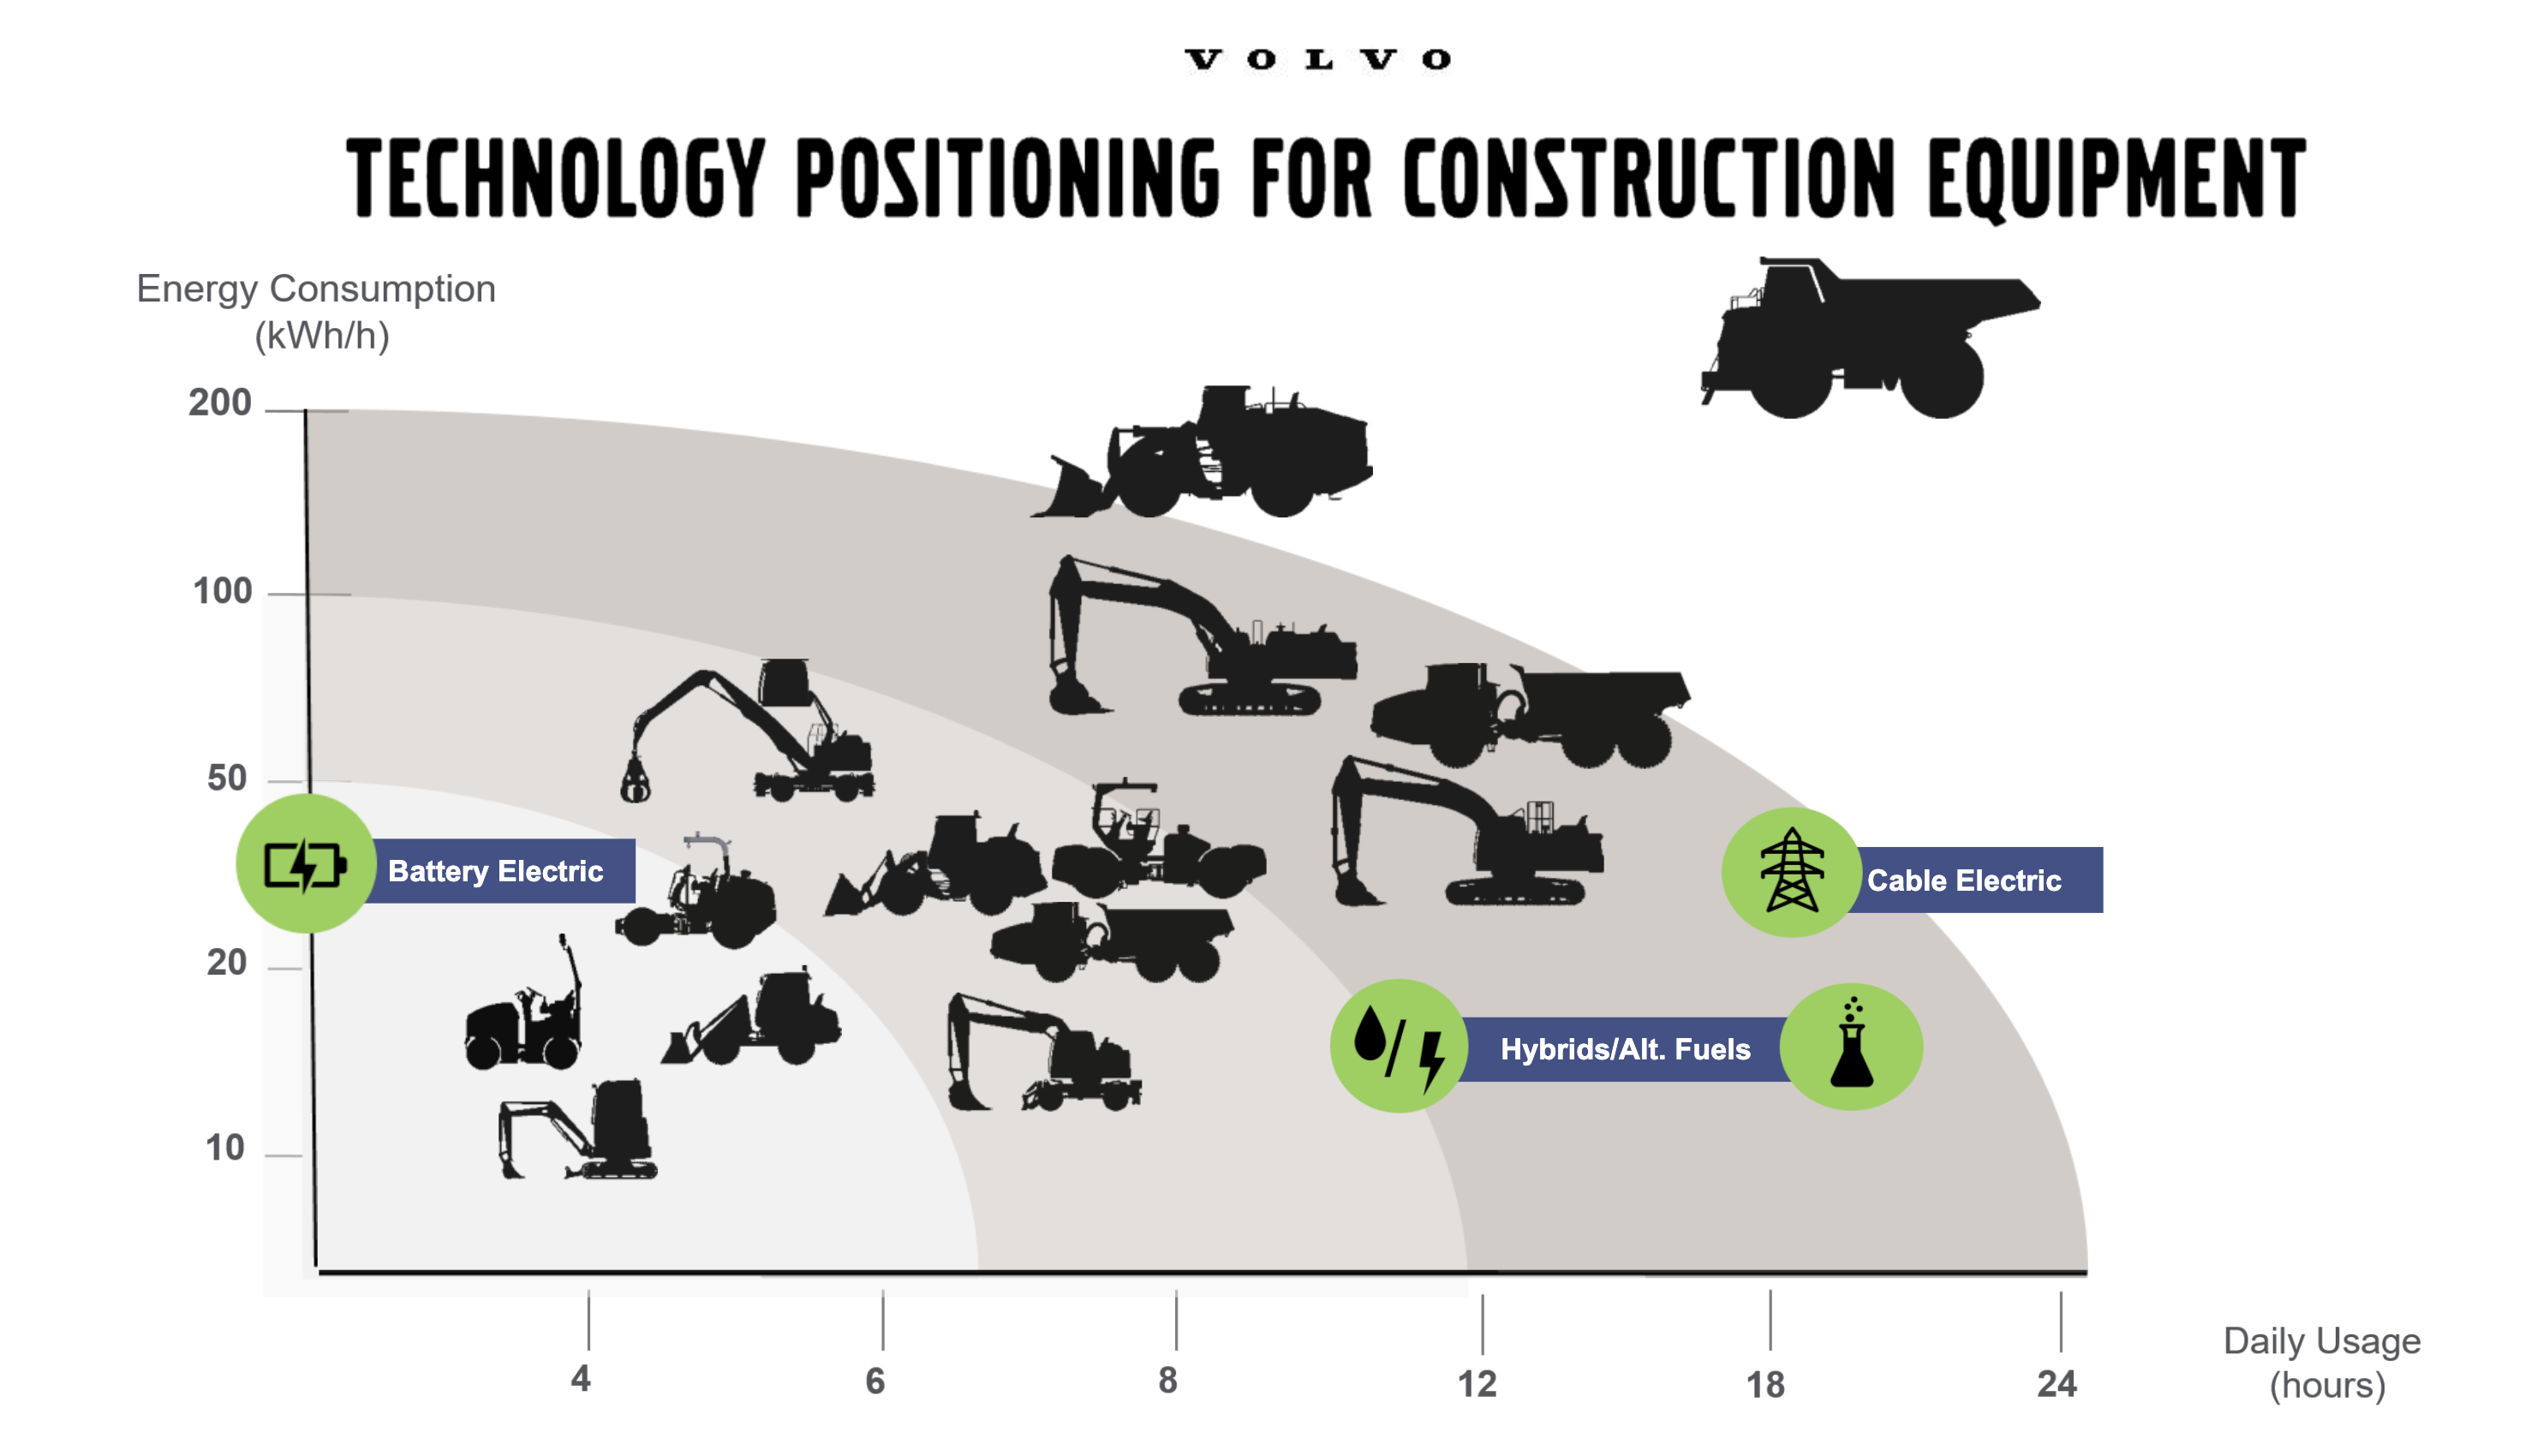 Technology Positioning for Construction Equipment 2